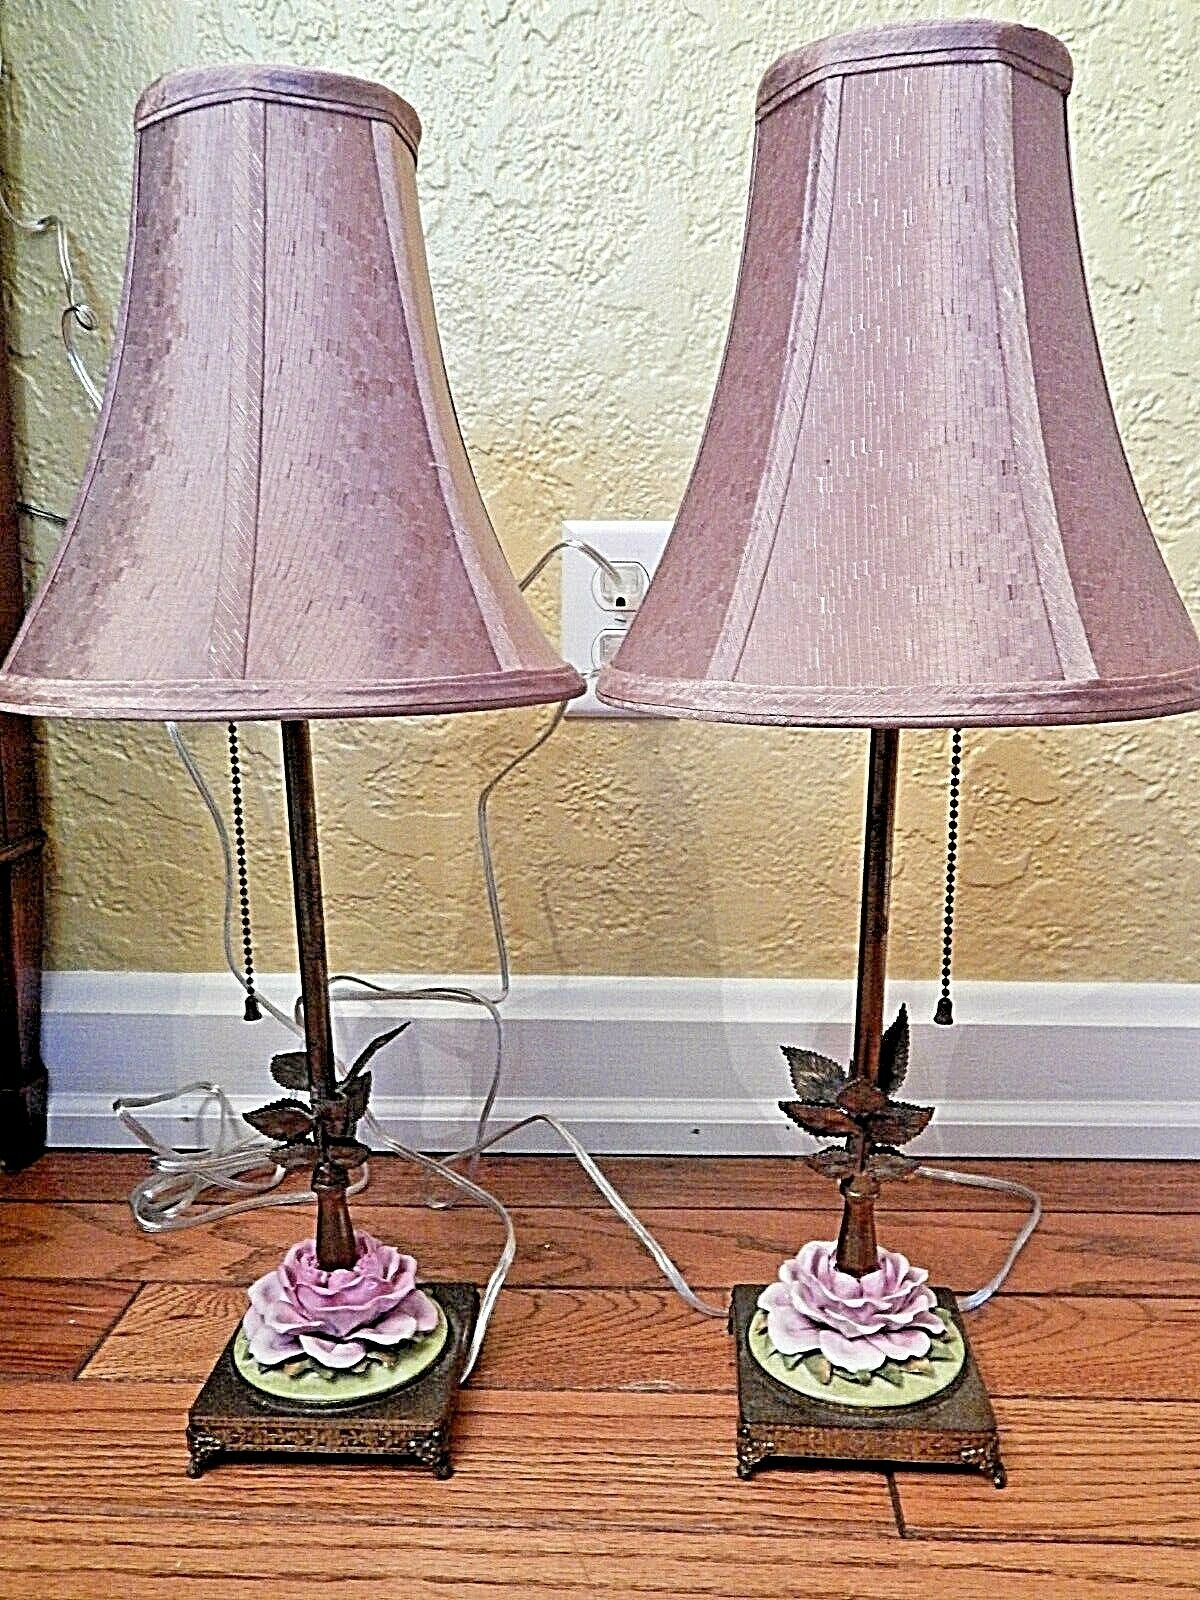 Antique Pair Of High Style Boudoir Lamps German Porcelain Flowers Rewired